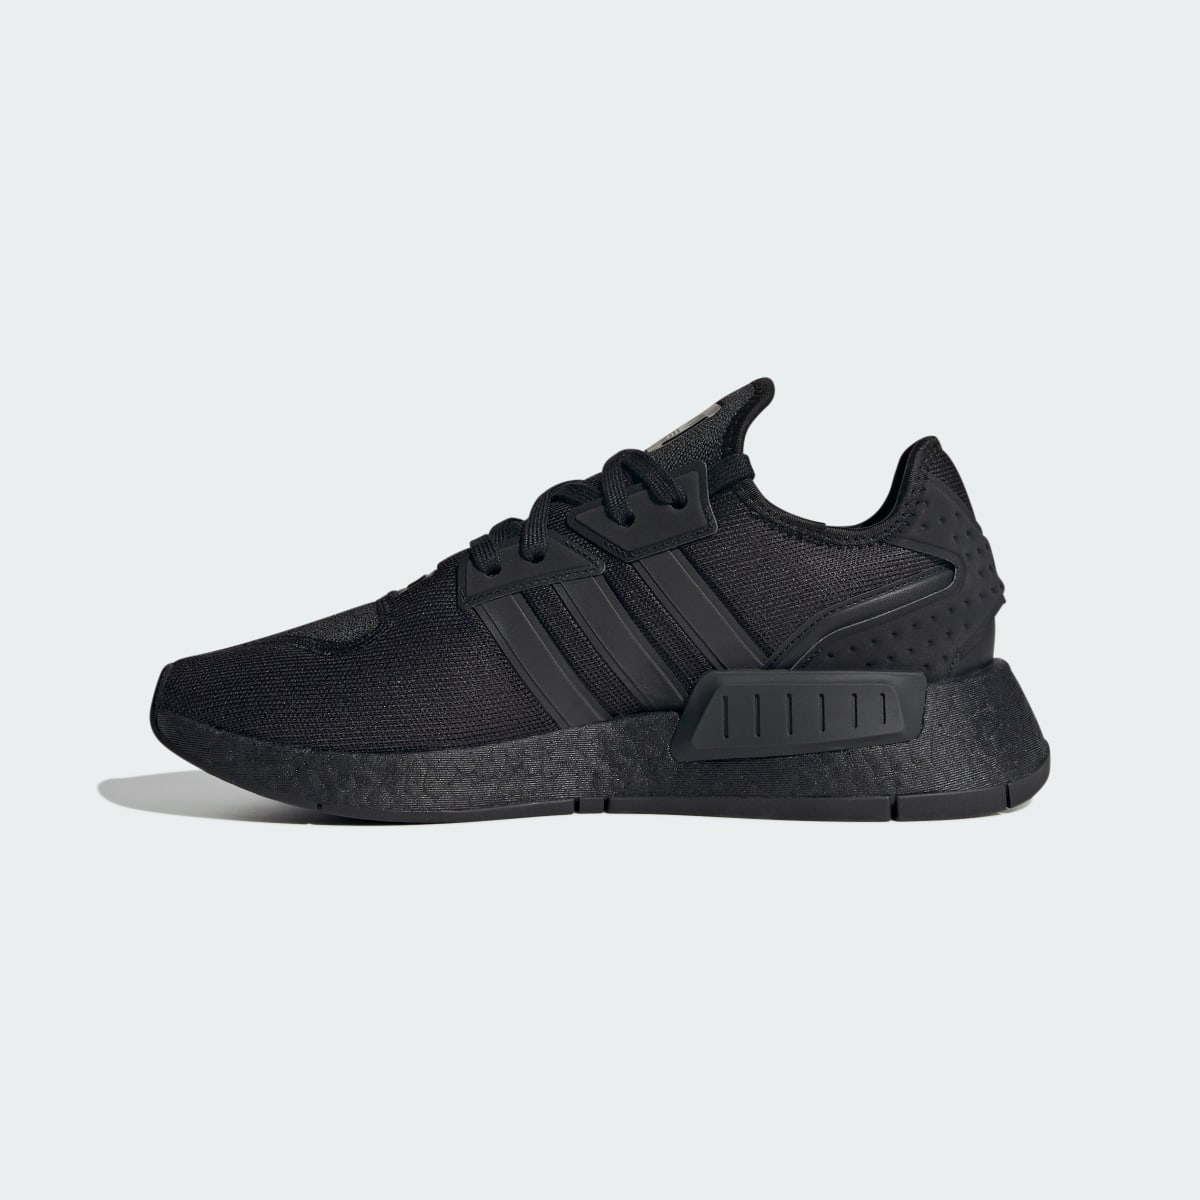 Adidas NMD_G1 Shoes. 13